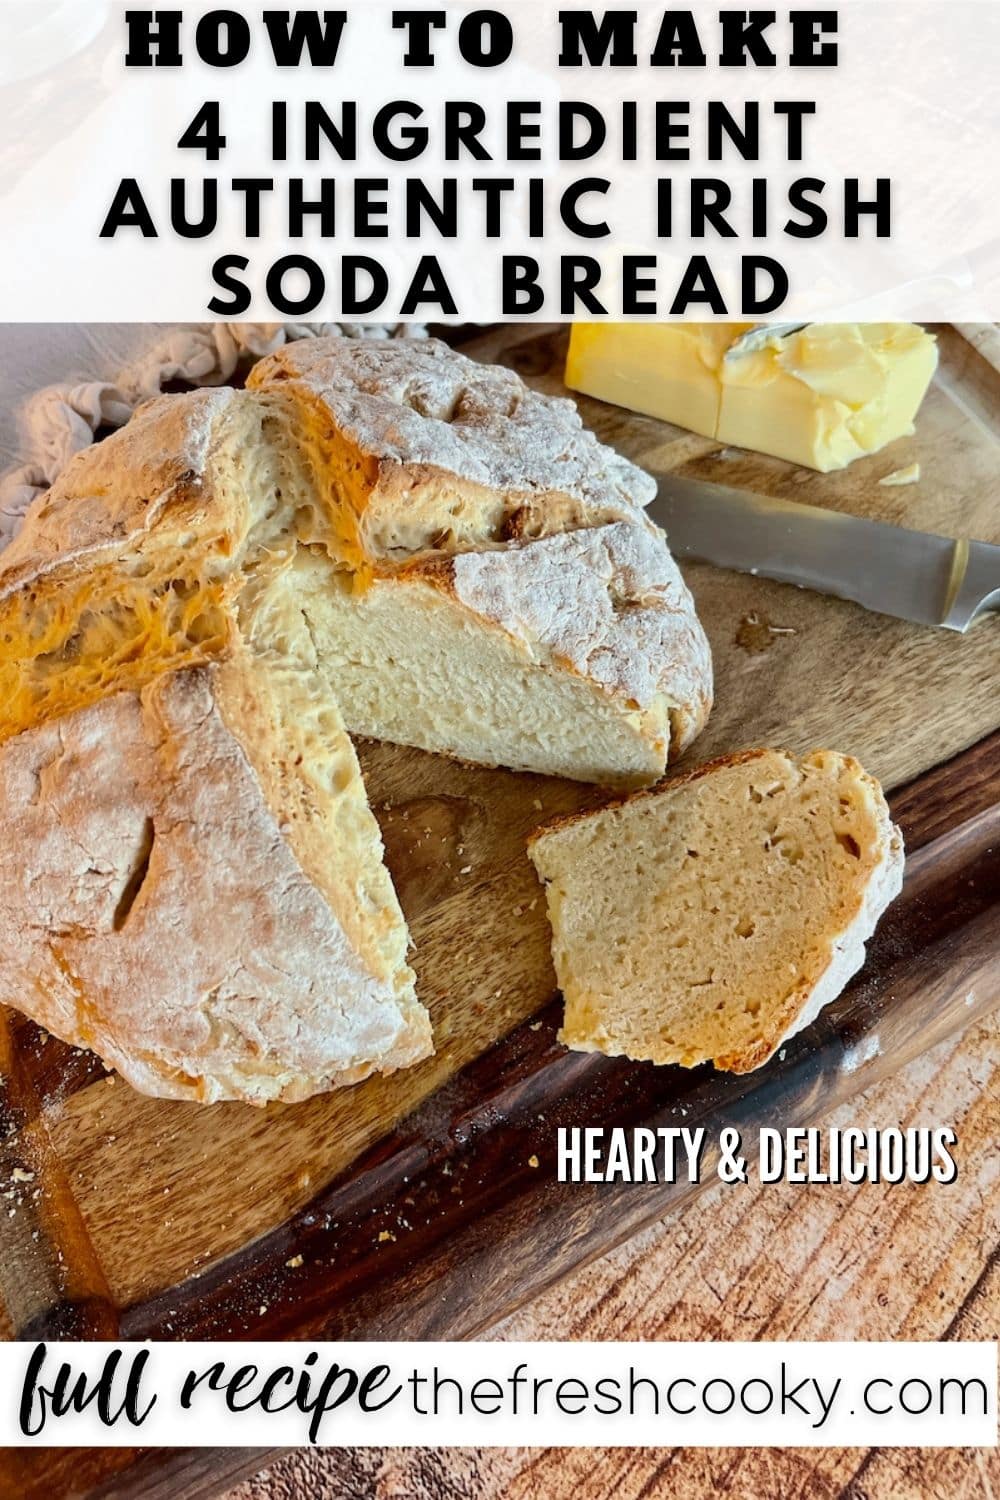 Pin for How to Make 4 Ingredient Authentic Irish Soda Bread with top down image of loaf of soda bread with wedge removed and butter in background.